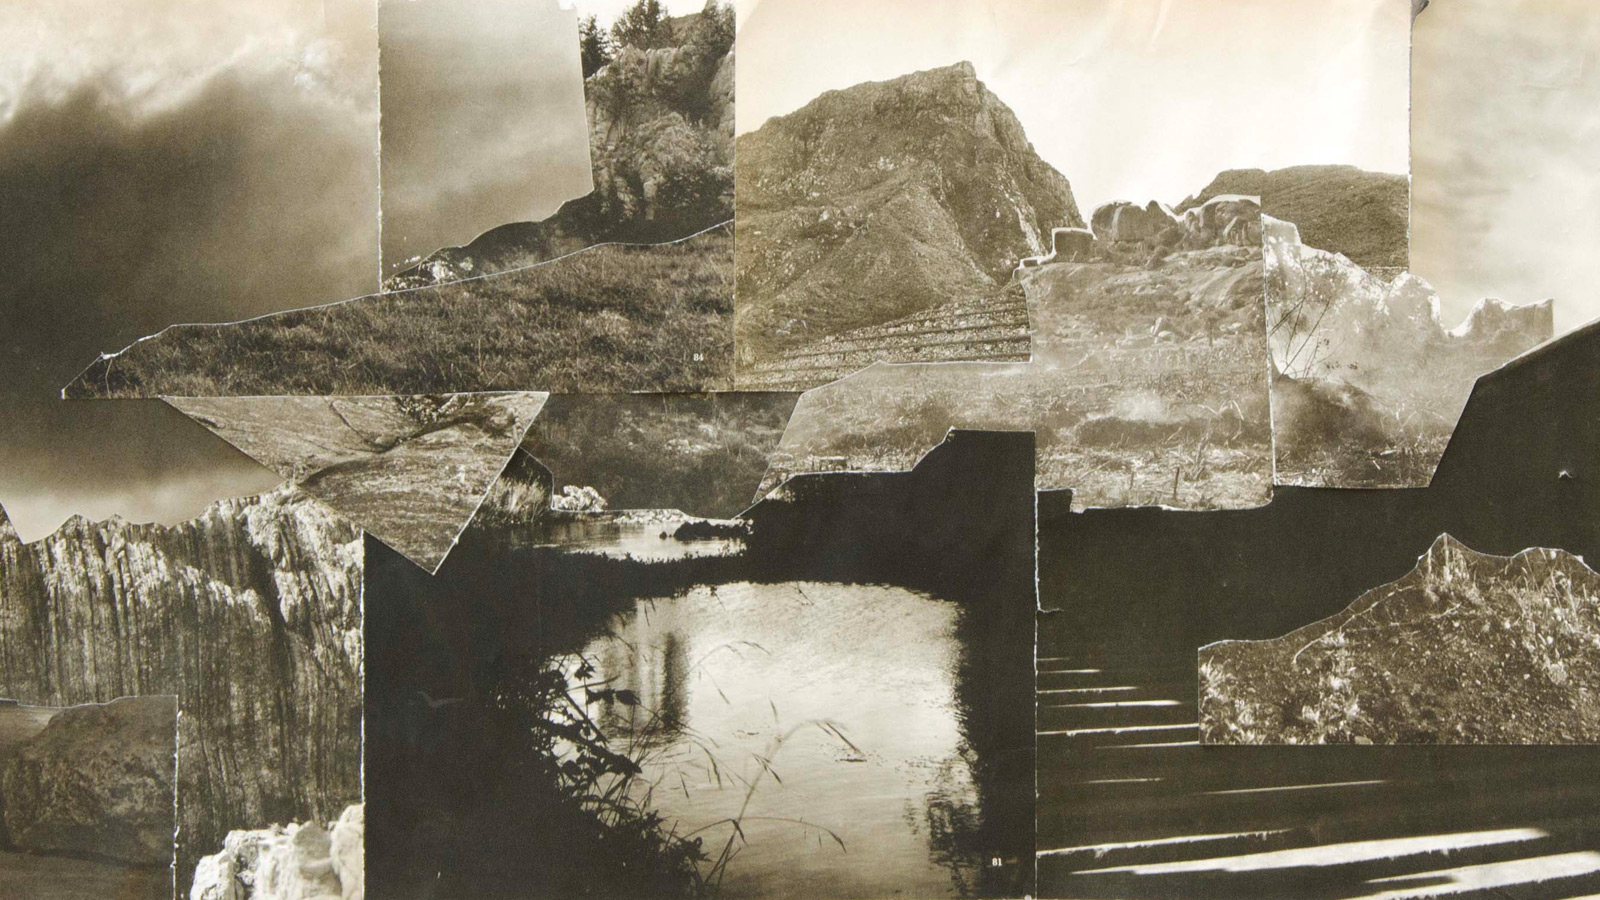 Virginia Colwell, Untitled ruins, 2014